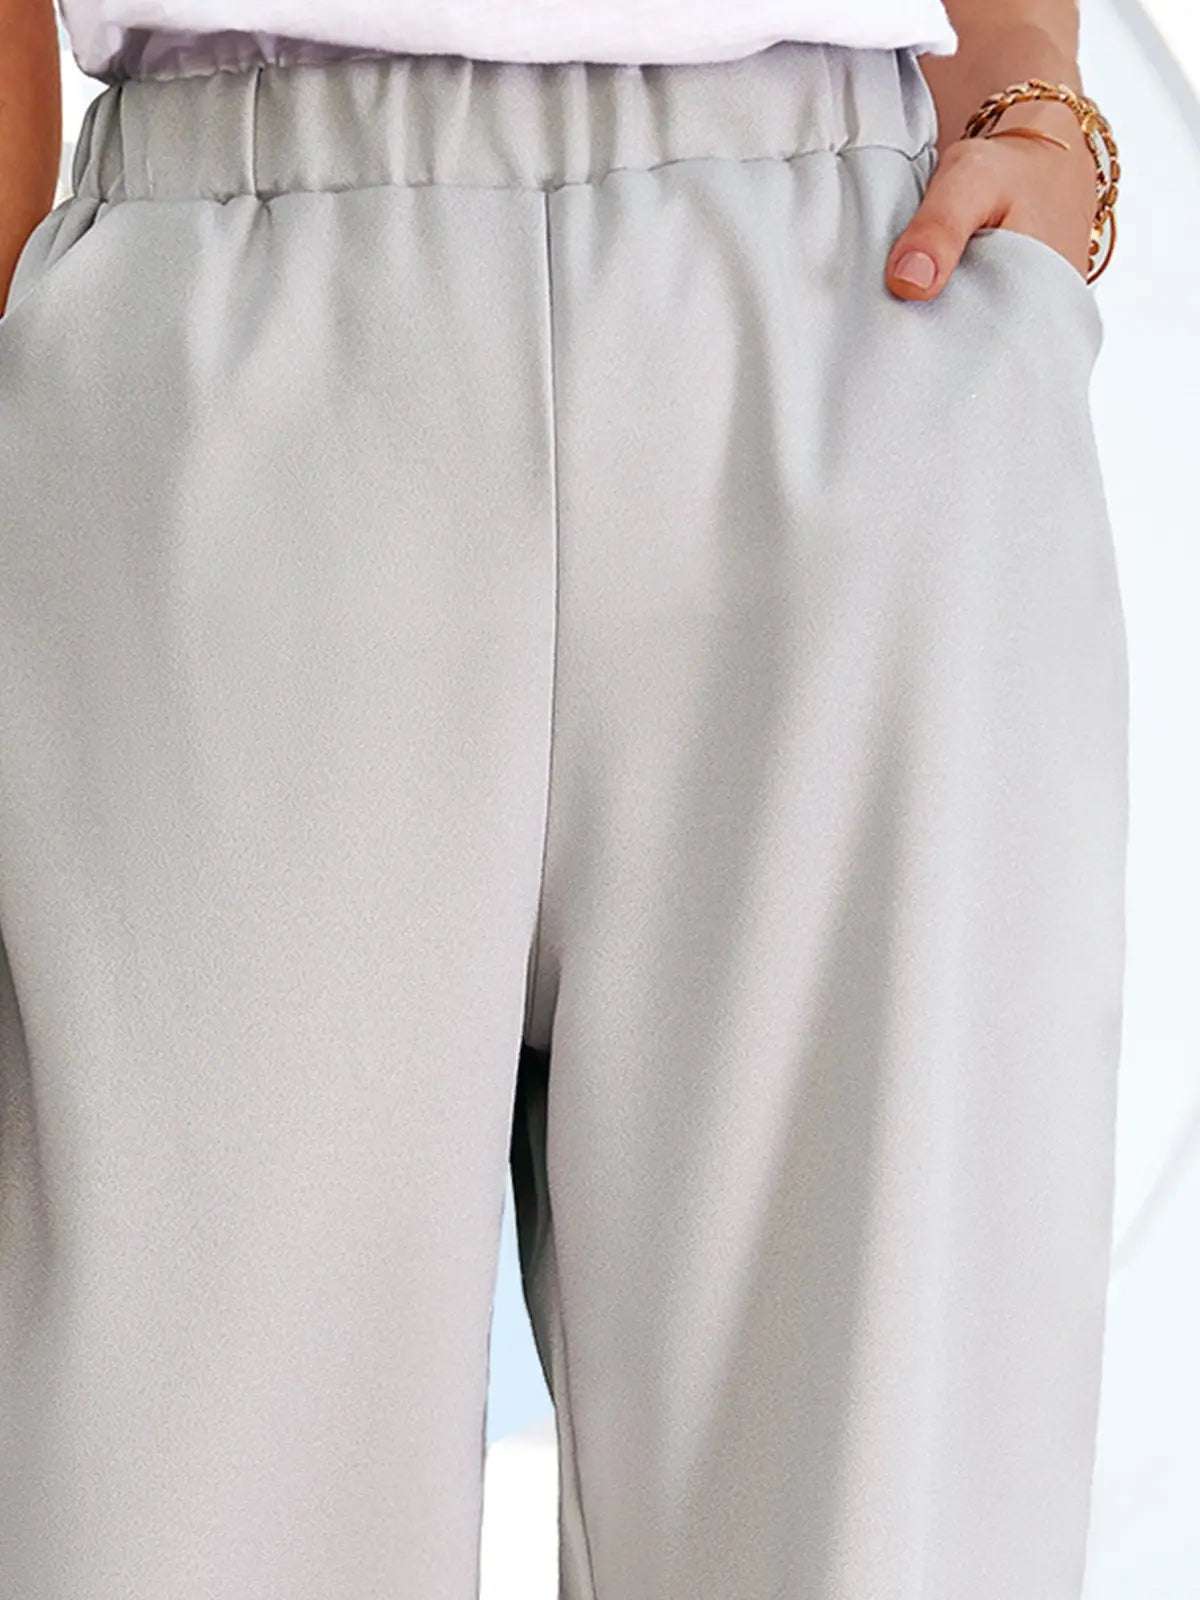 Hot-selling cotton and linen casual solid color straight-leg pants women mysite